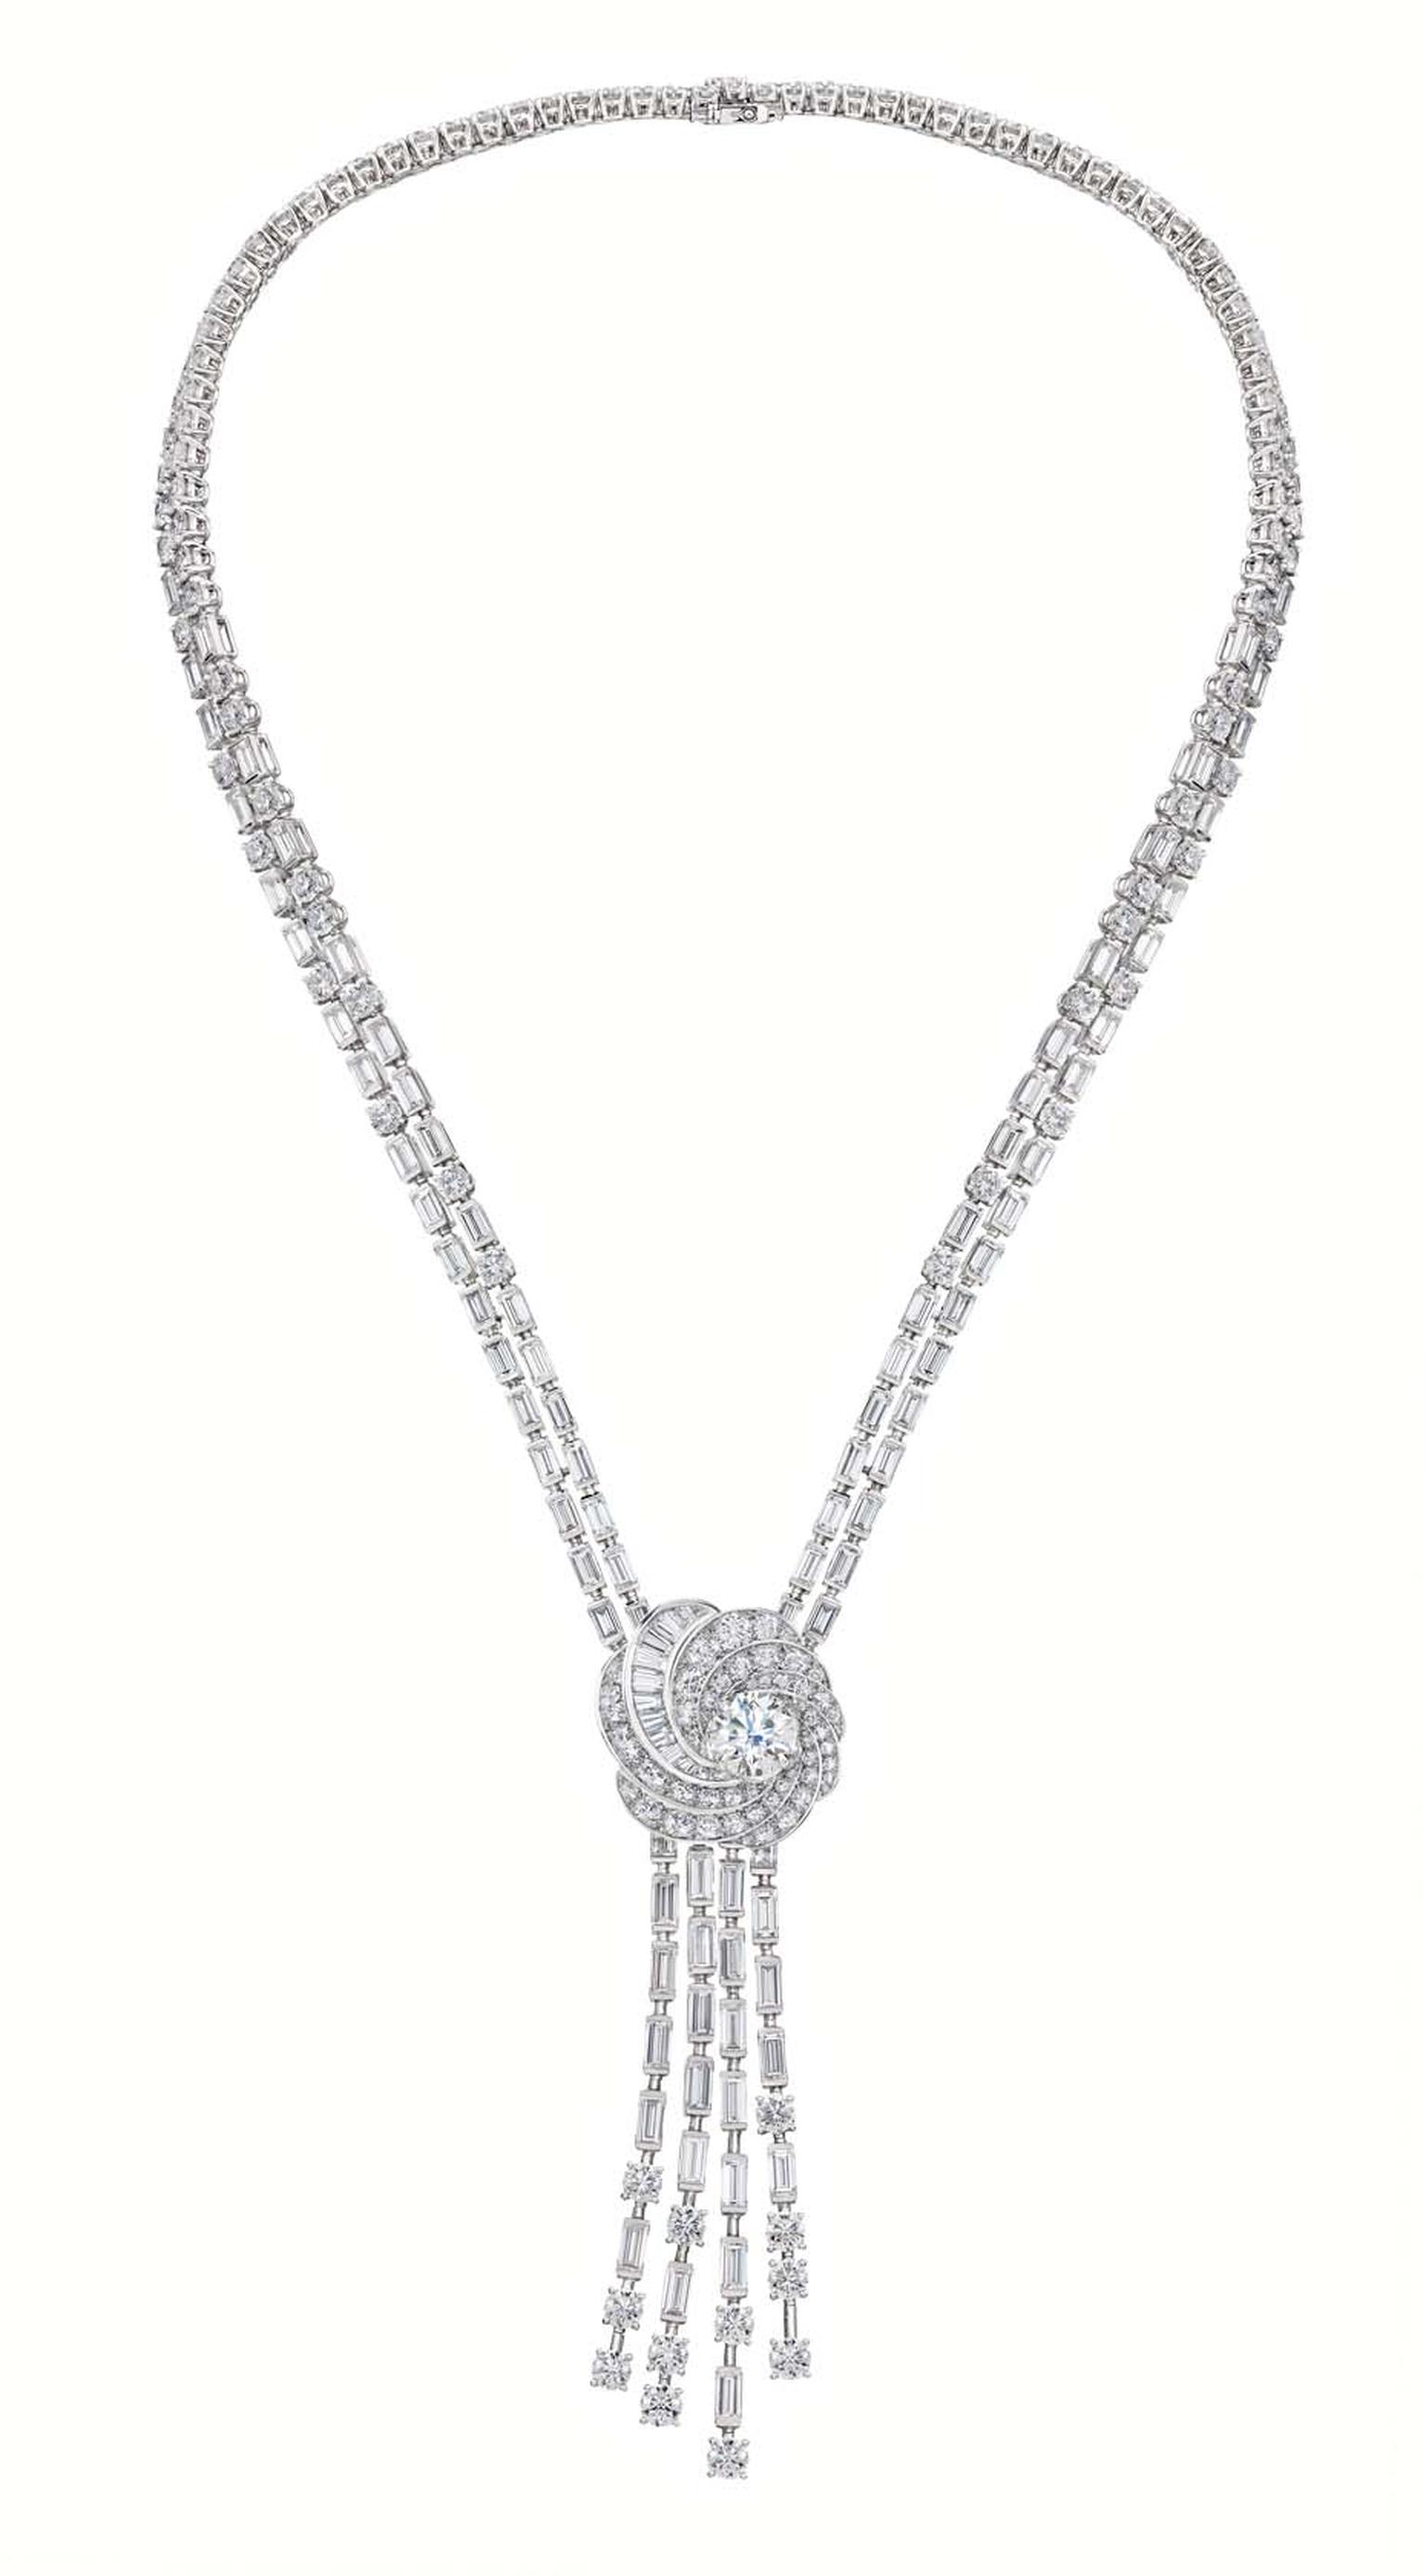 De Beers Aria high jewellery necklace in white gold featuring a swirling pendant set with brilliant and baguette-cut diamonds surrounding a brilliant-cut diamond.